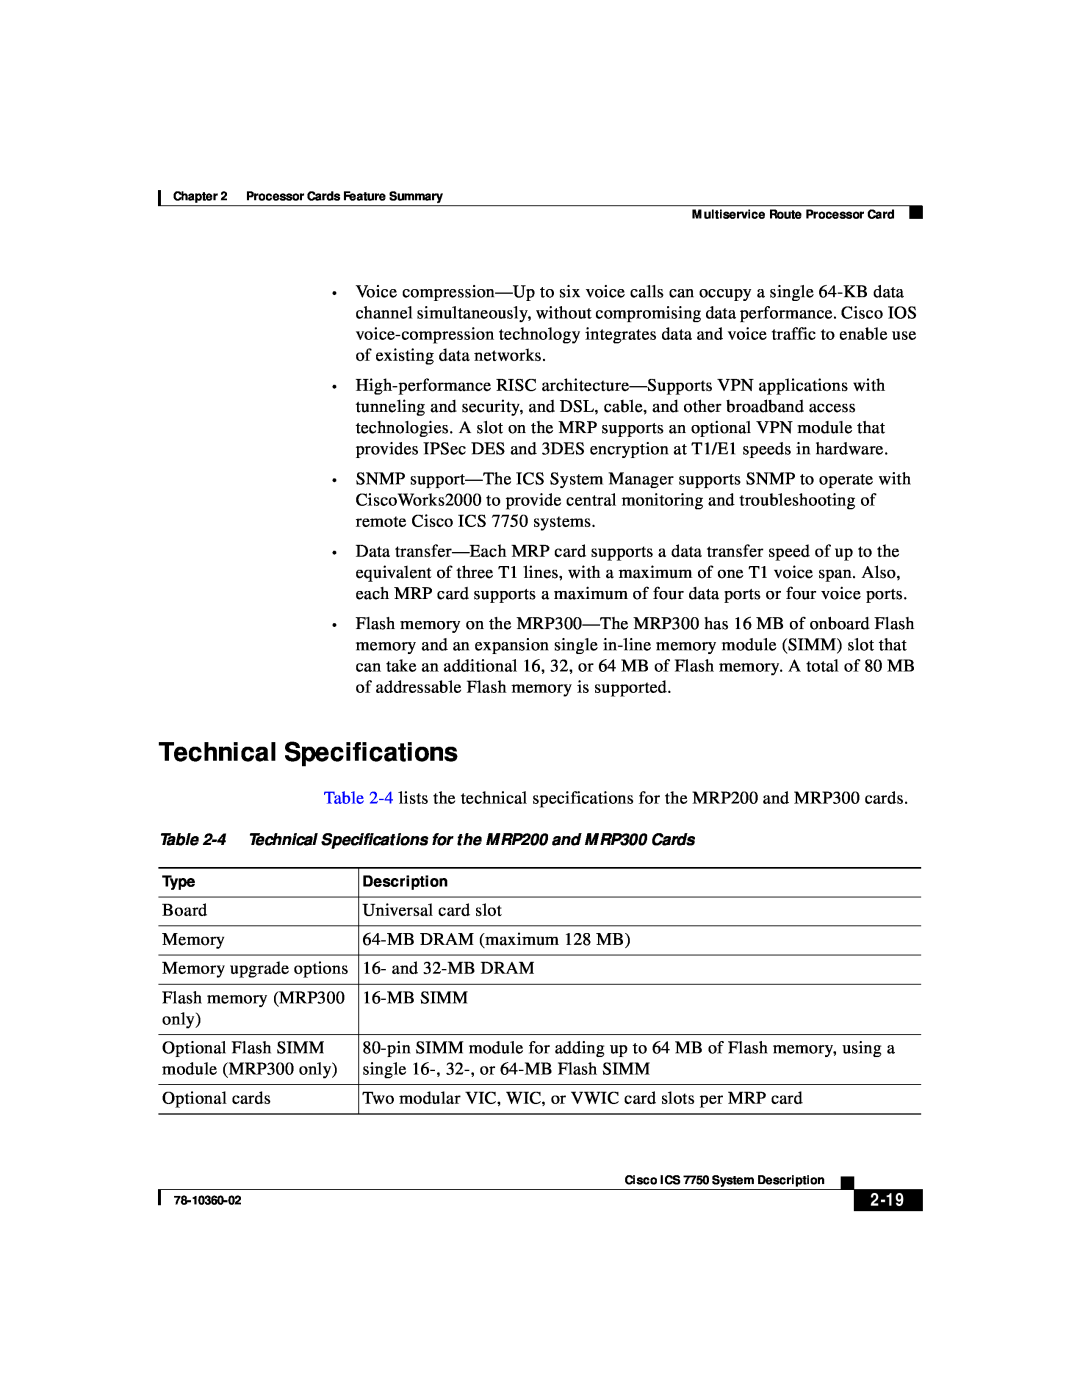 Cisco Systems ICS-7750 manual 2-19, 4 Technical Specifications for the MRP200 and MRP300 Cards 